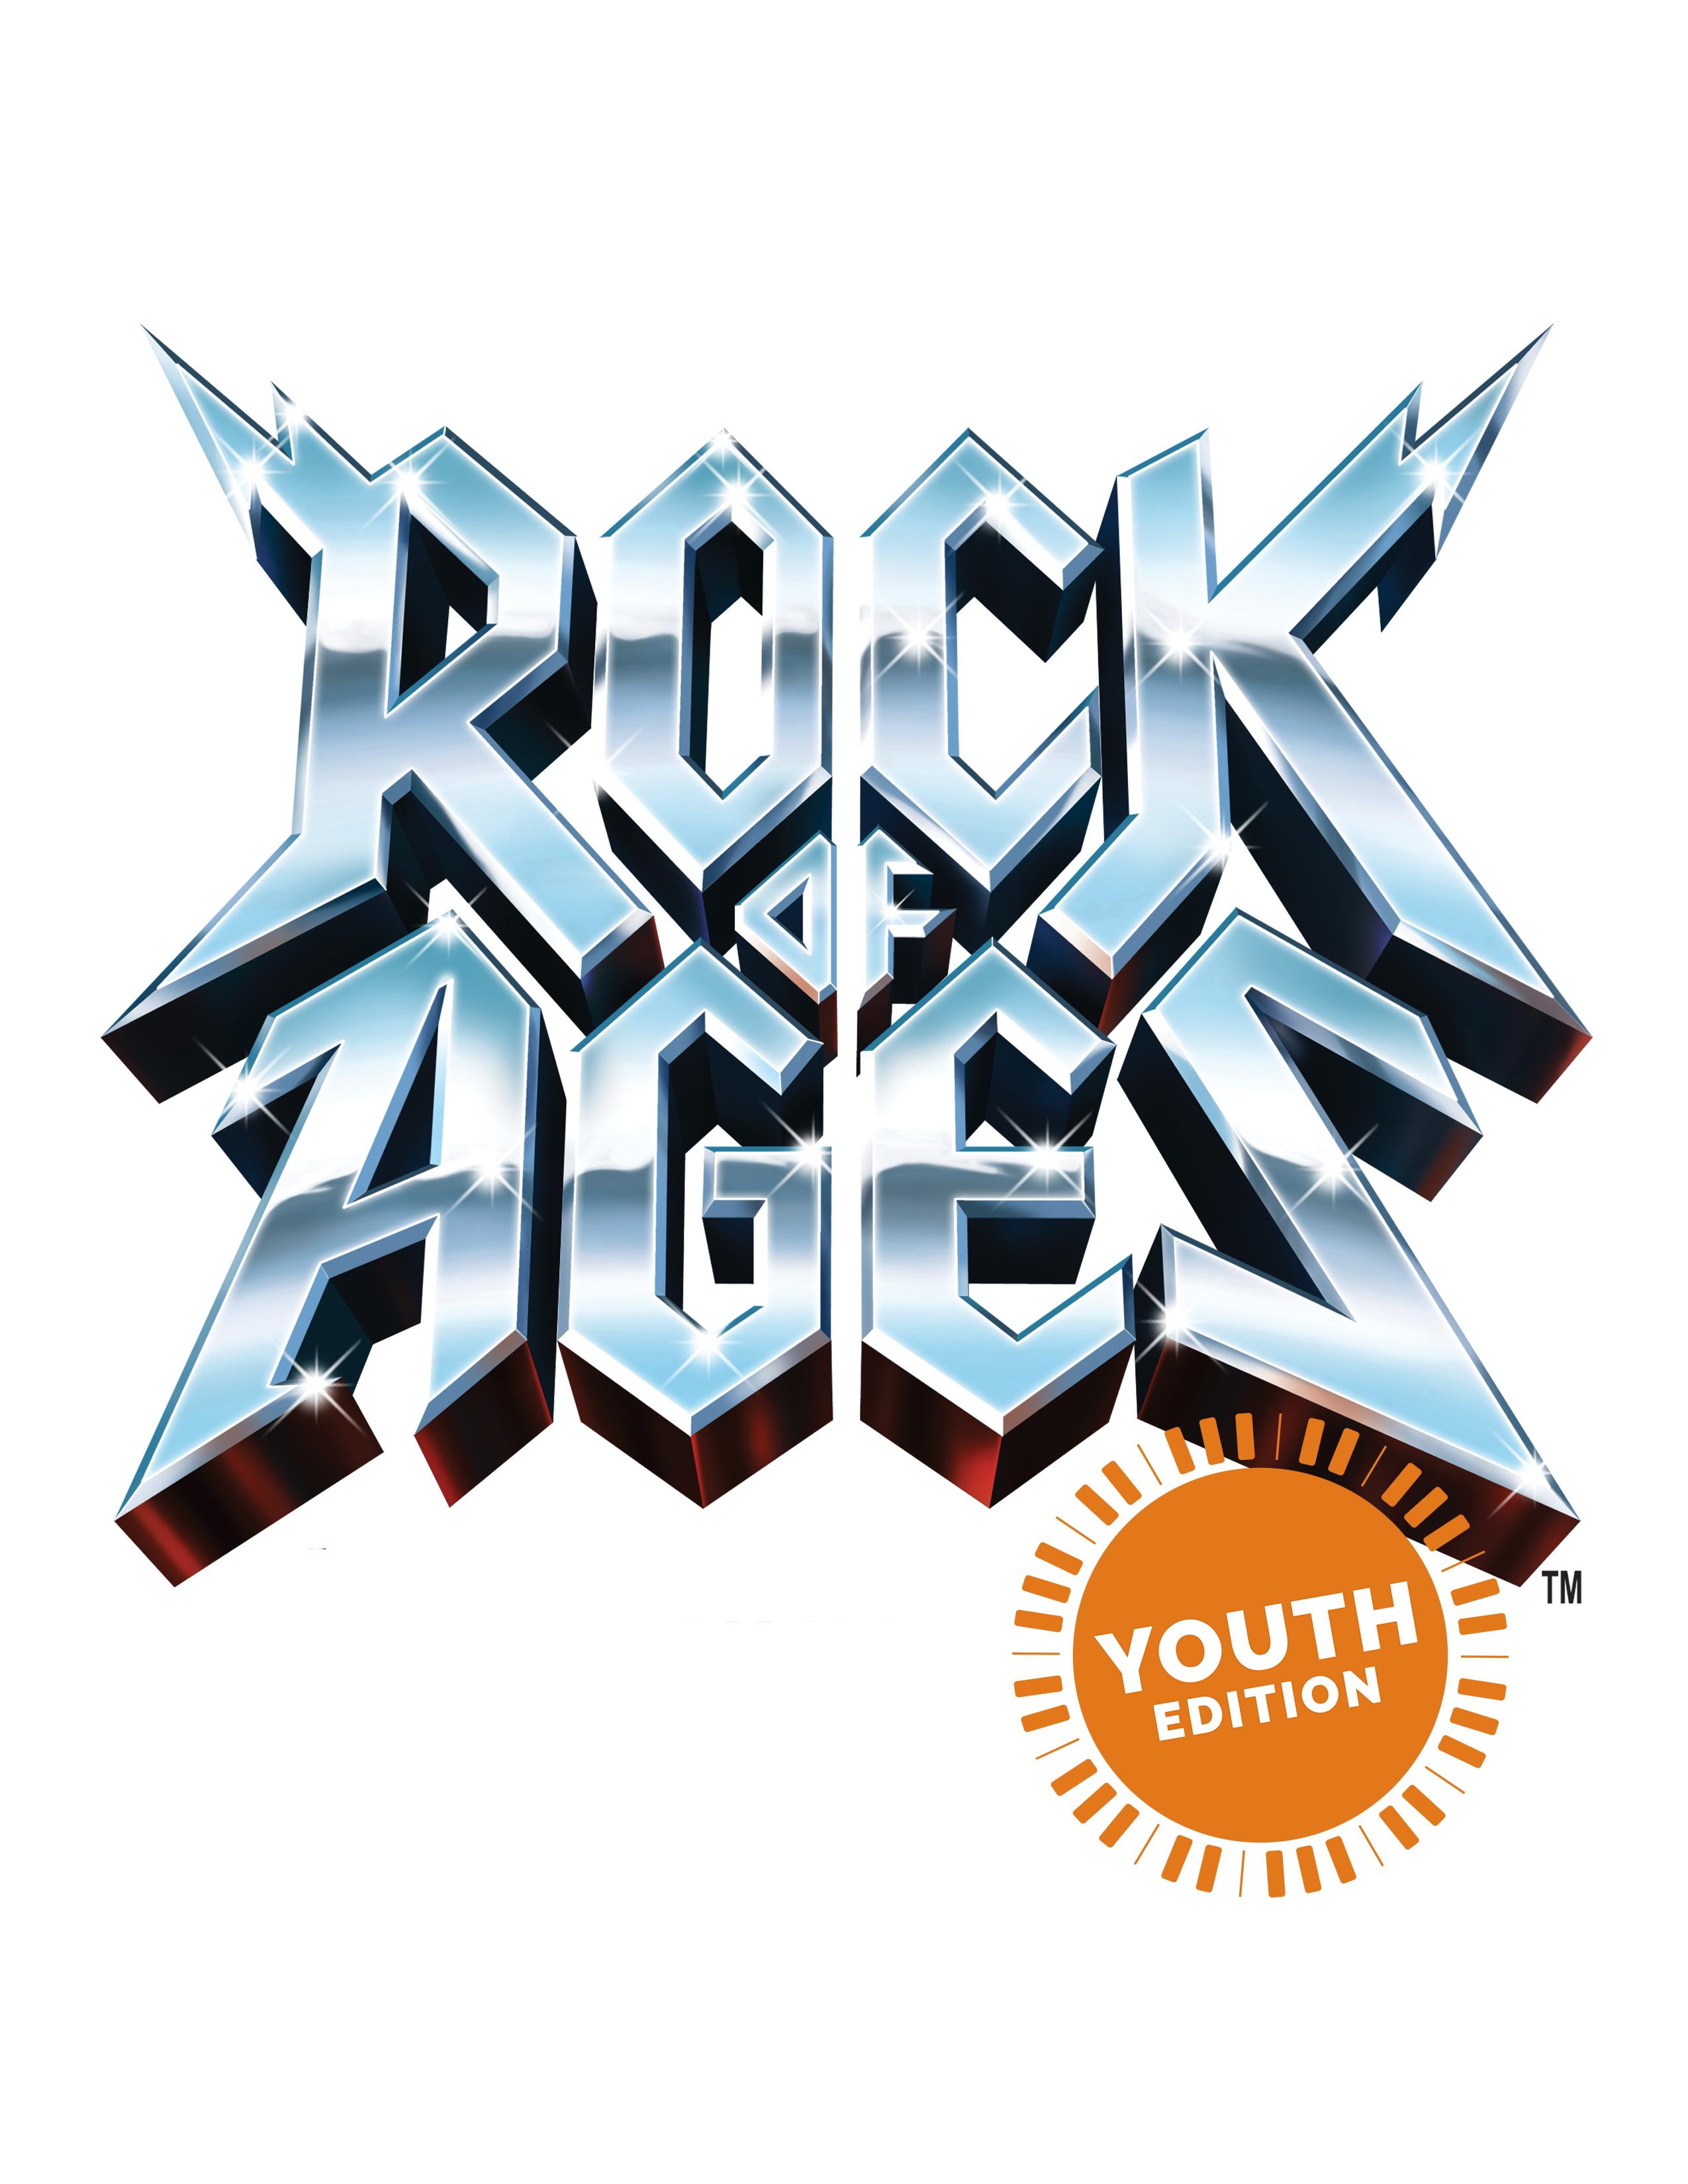 Rock of Ages Youth Edition logo